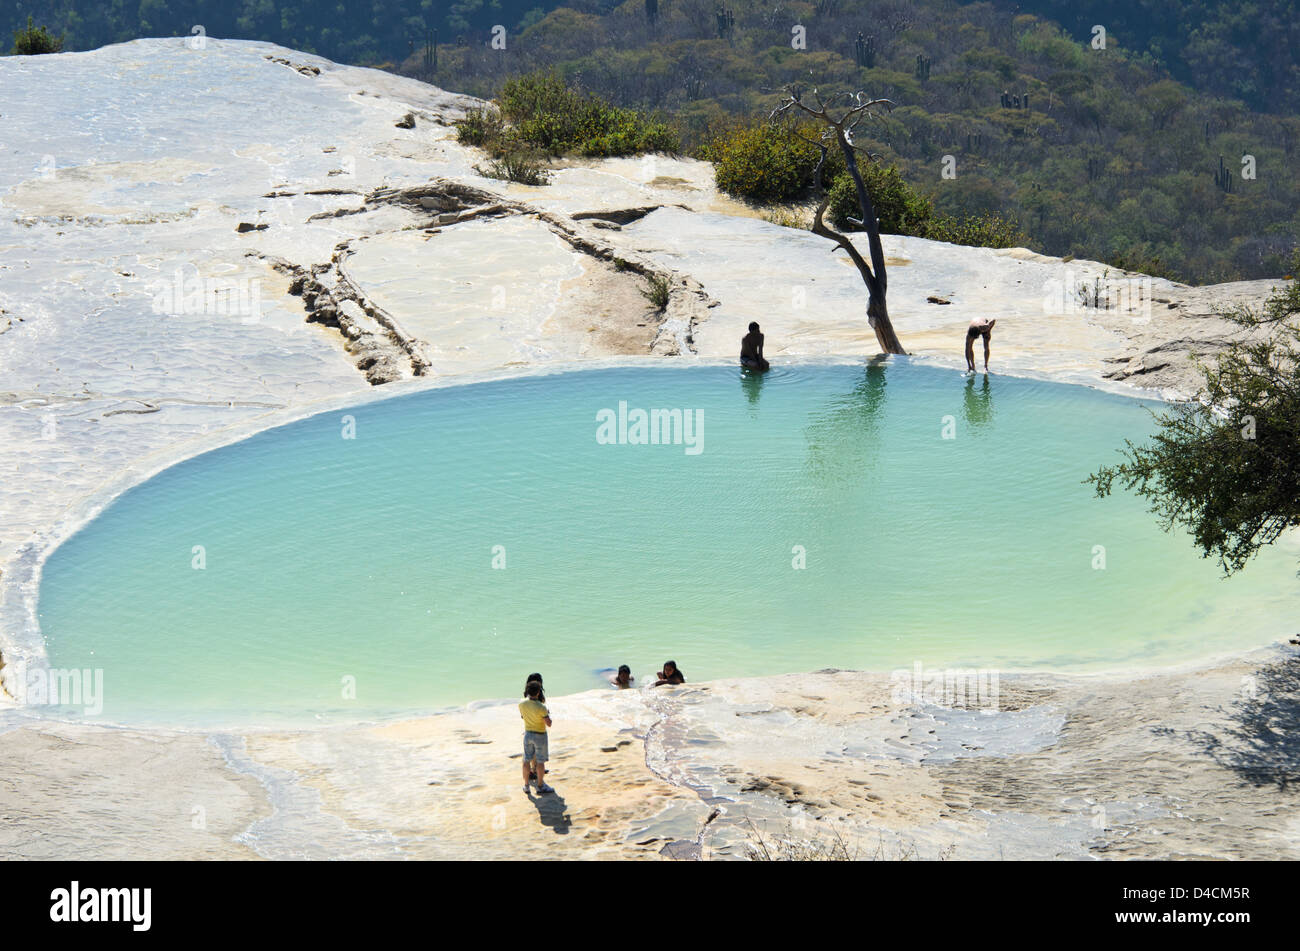 One of the pools at Hierve el Agua mineral springs, Oaxaca, Mexico. Stock Photo